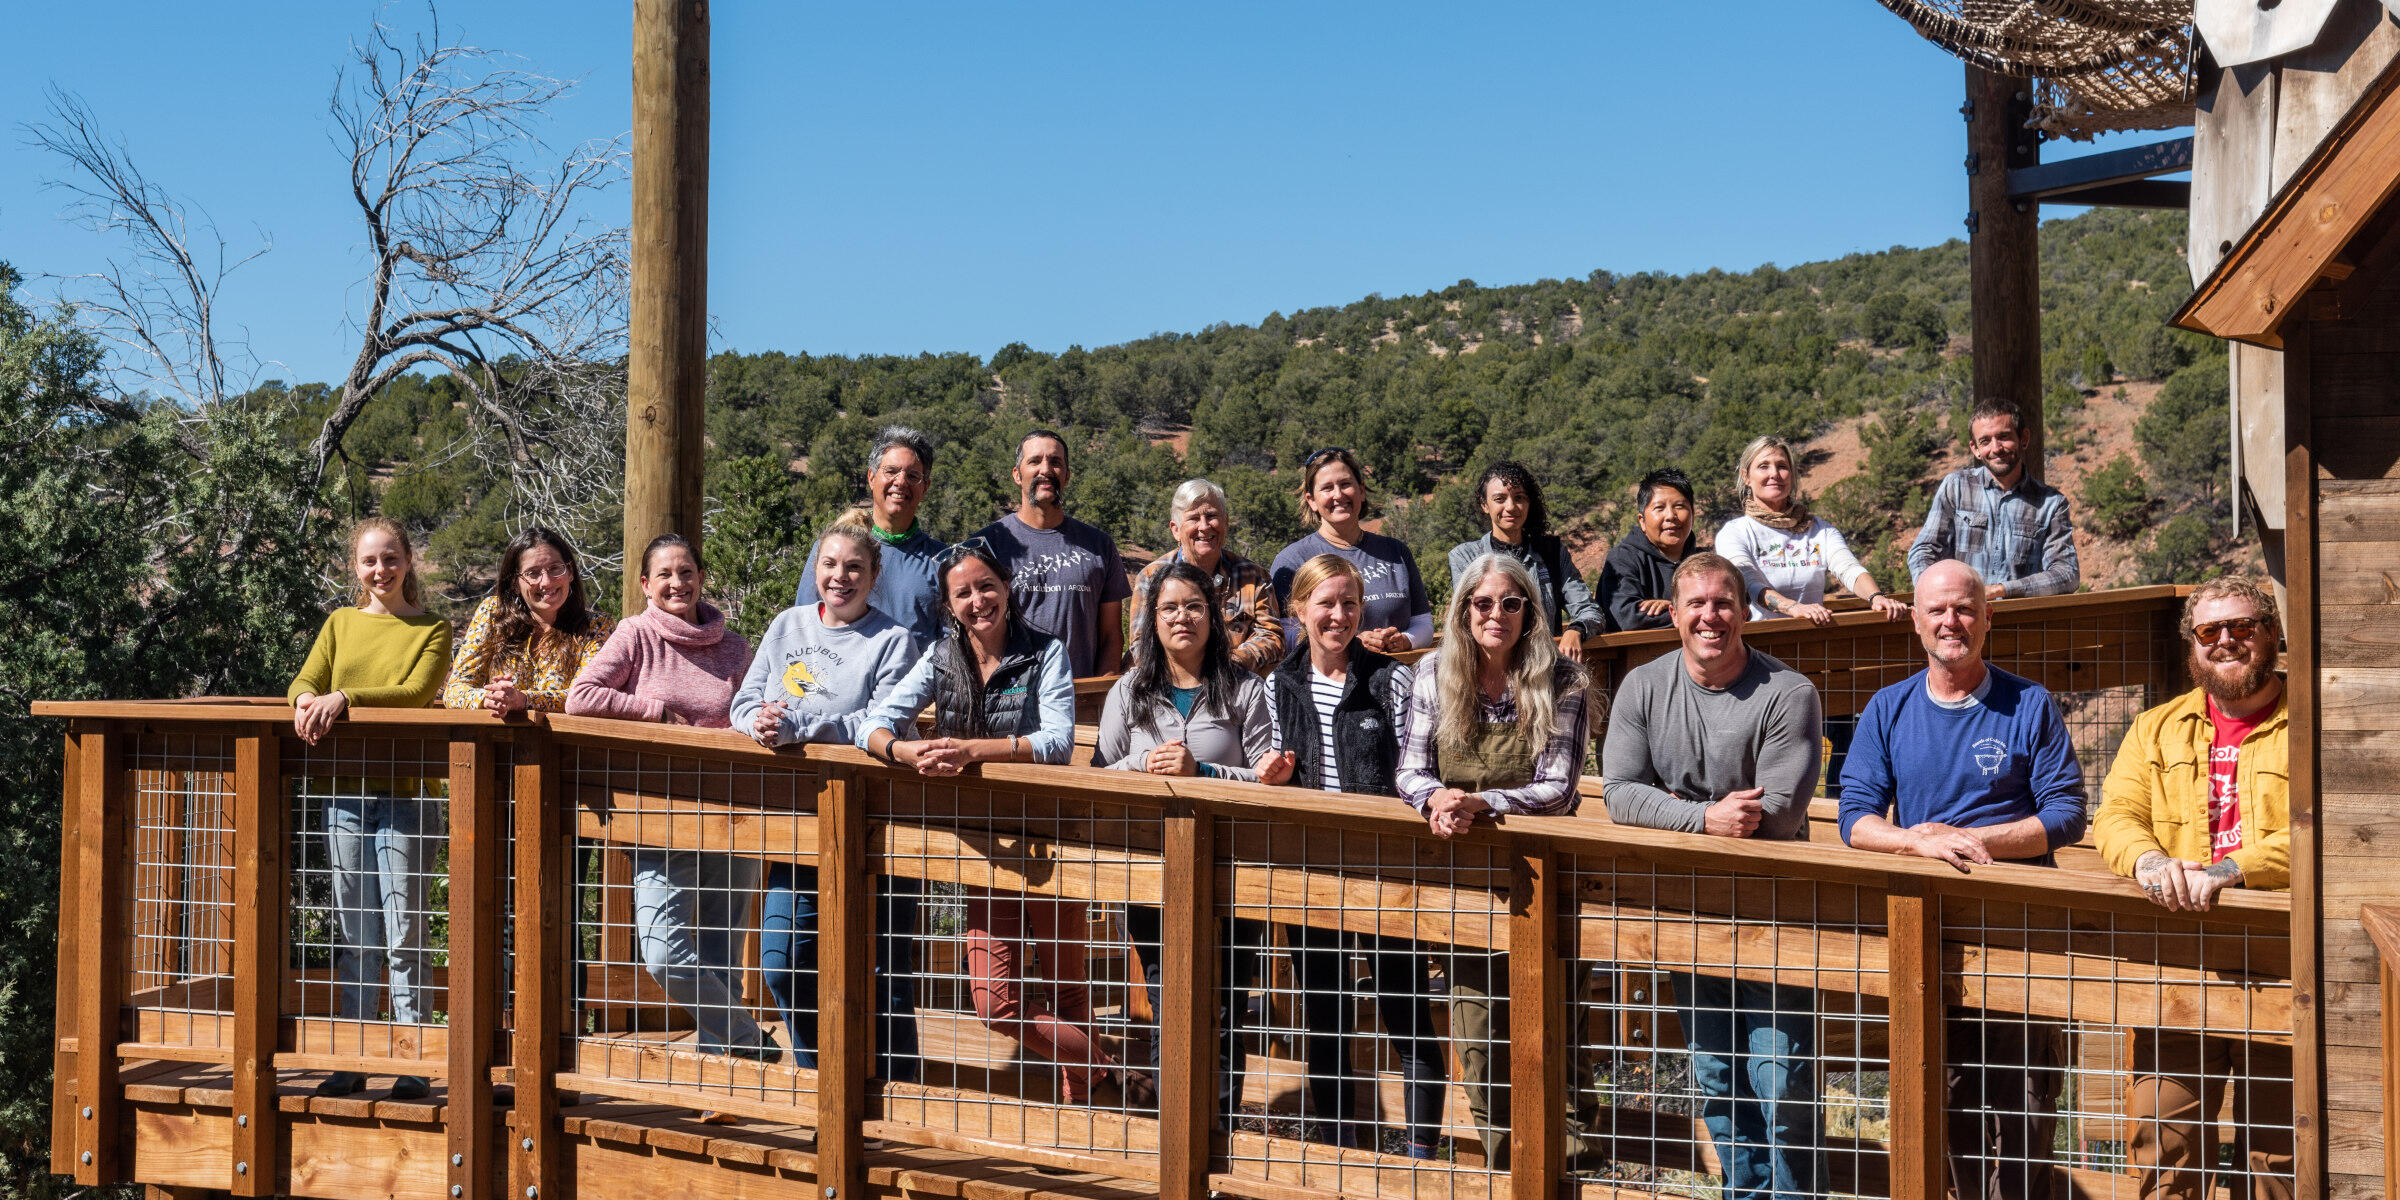 A group photo of nineteen adults standing on a wooden ramp to a playground with juniper forest in the background.